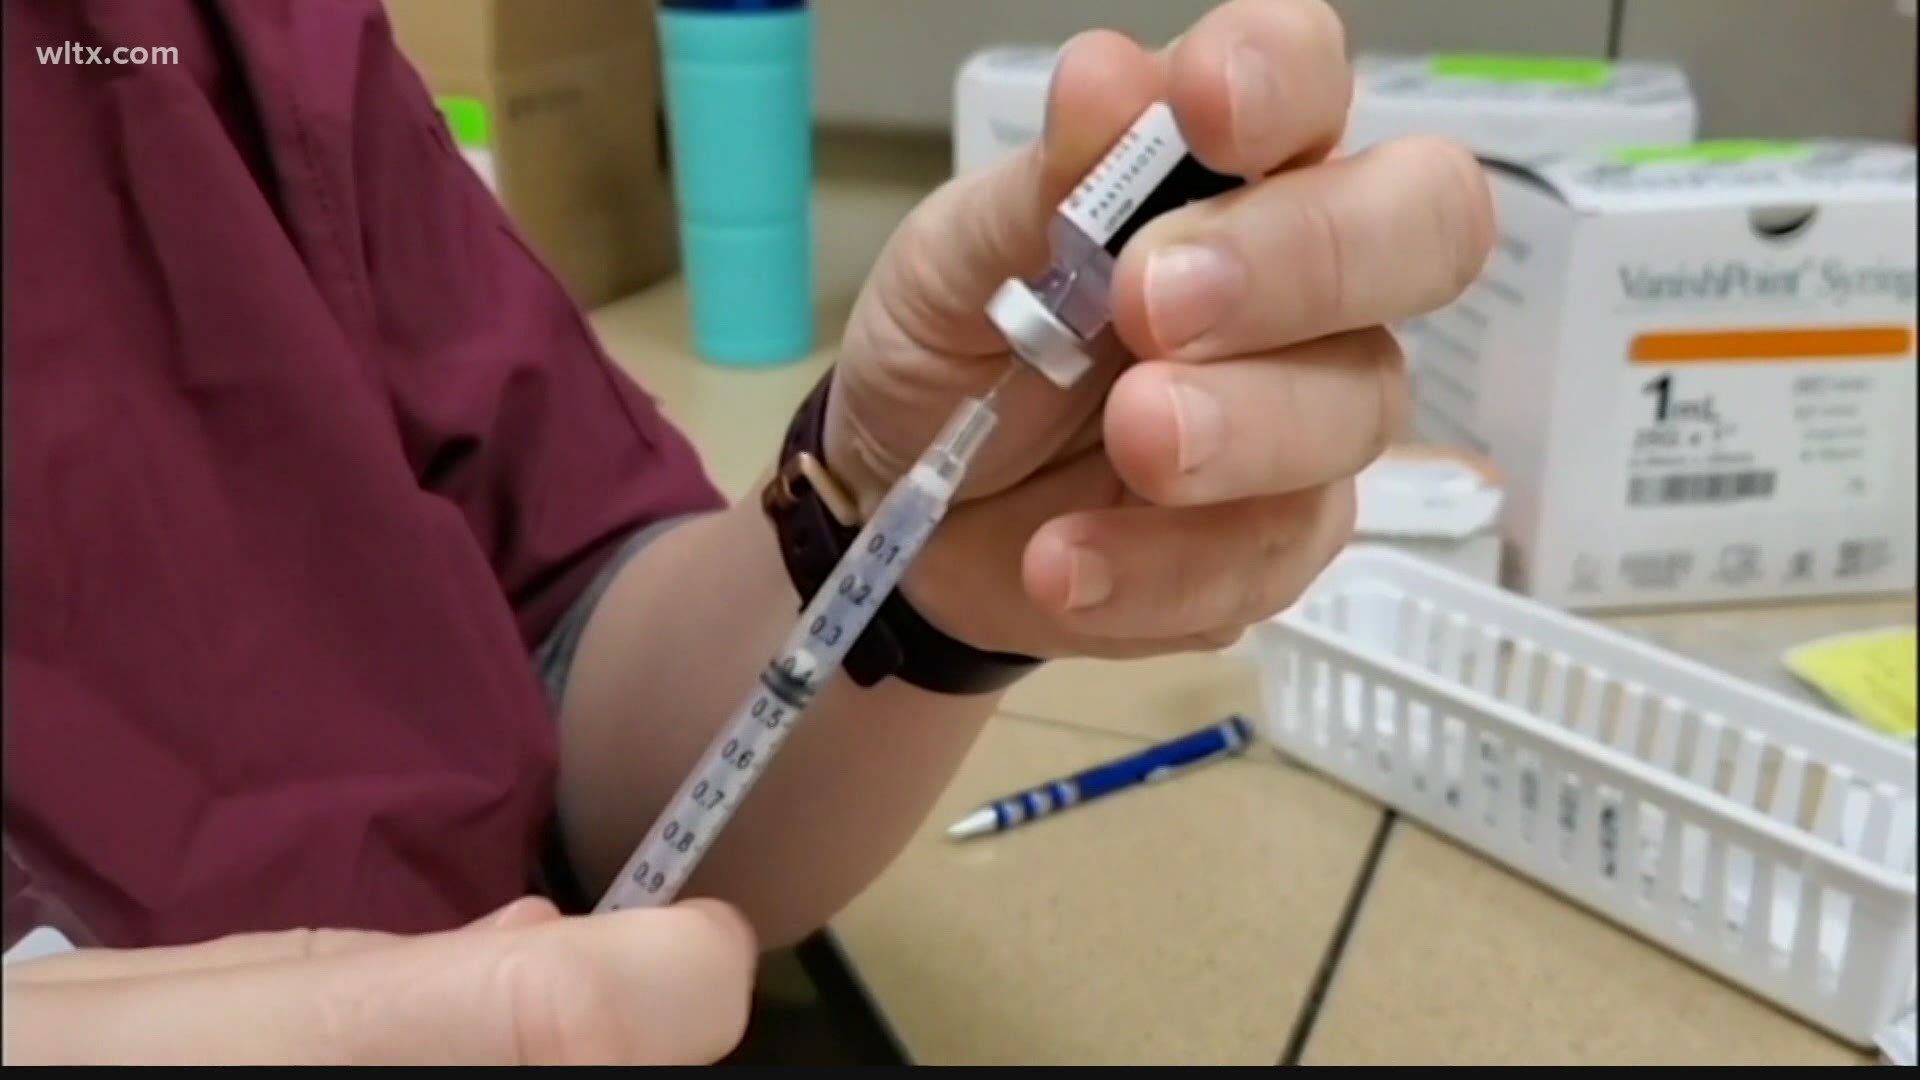 Slightly less than 40% of South Carolinians are fully vaccinated.